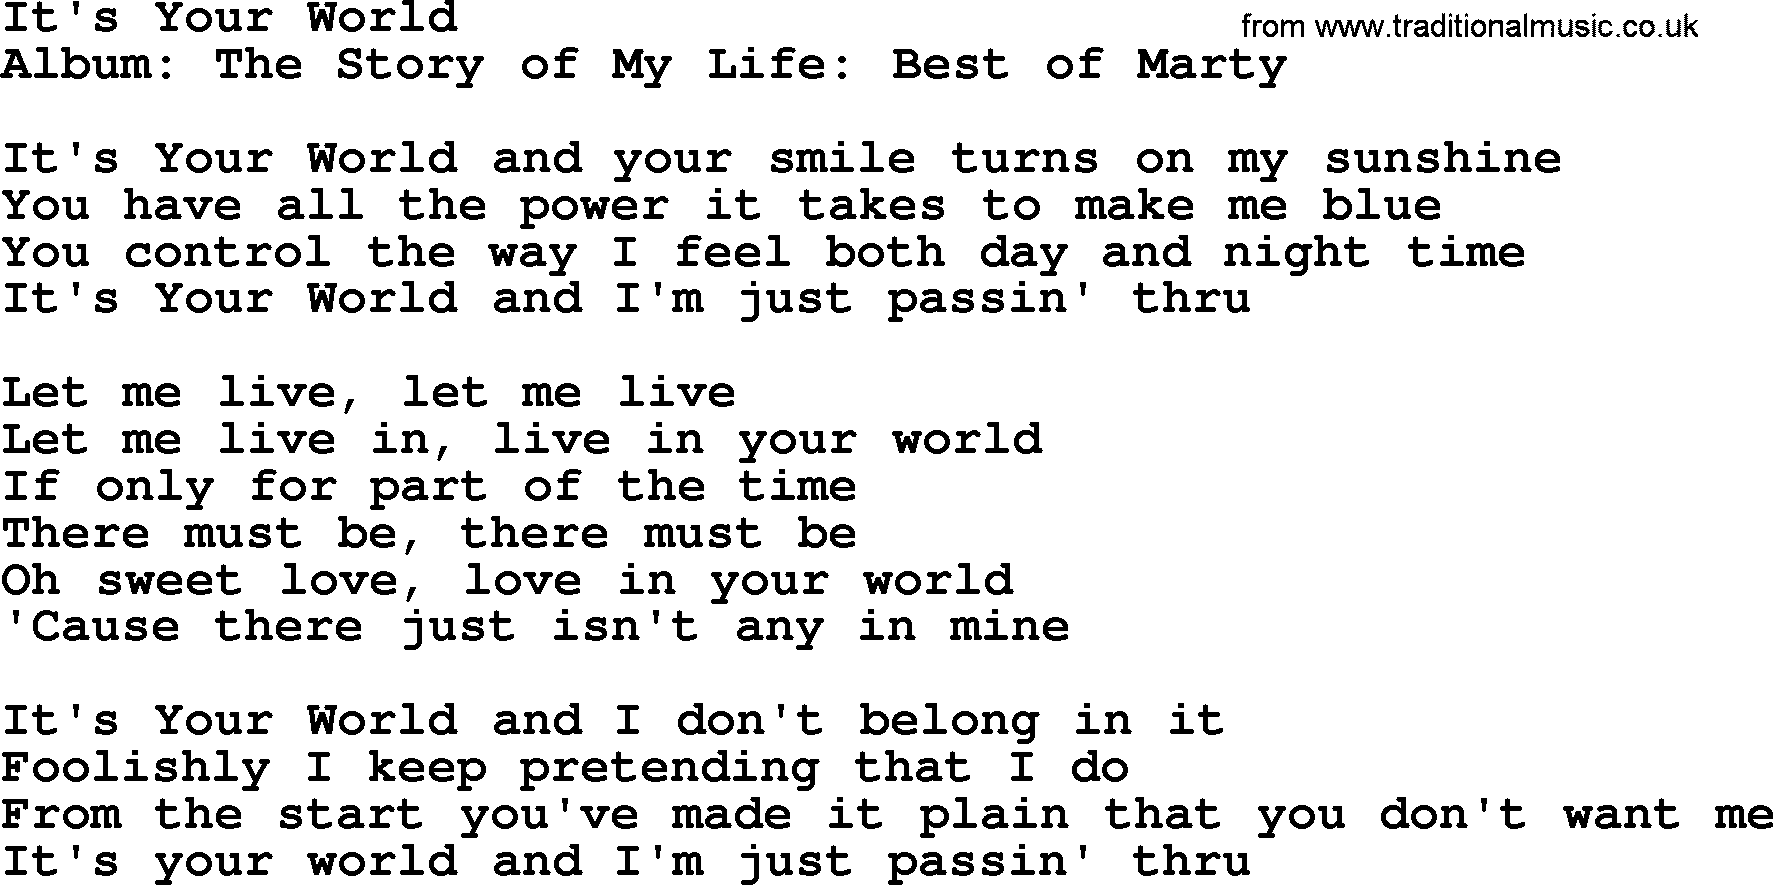 Marty Robbins song: It's Your World, lyrics